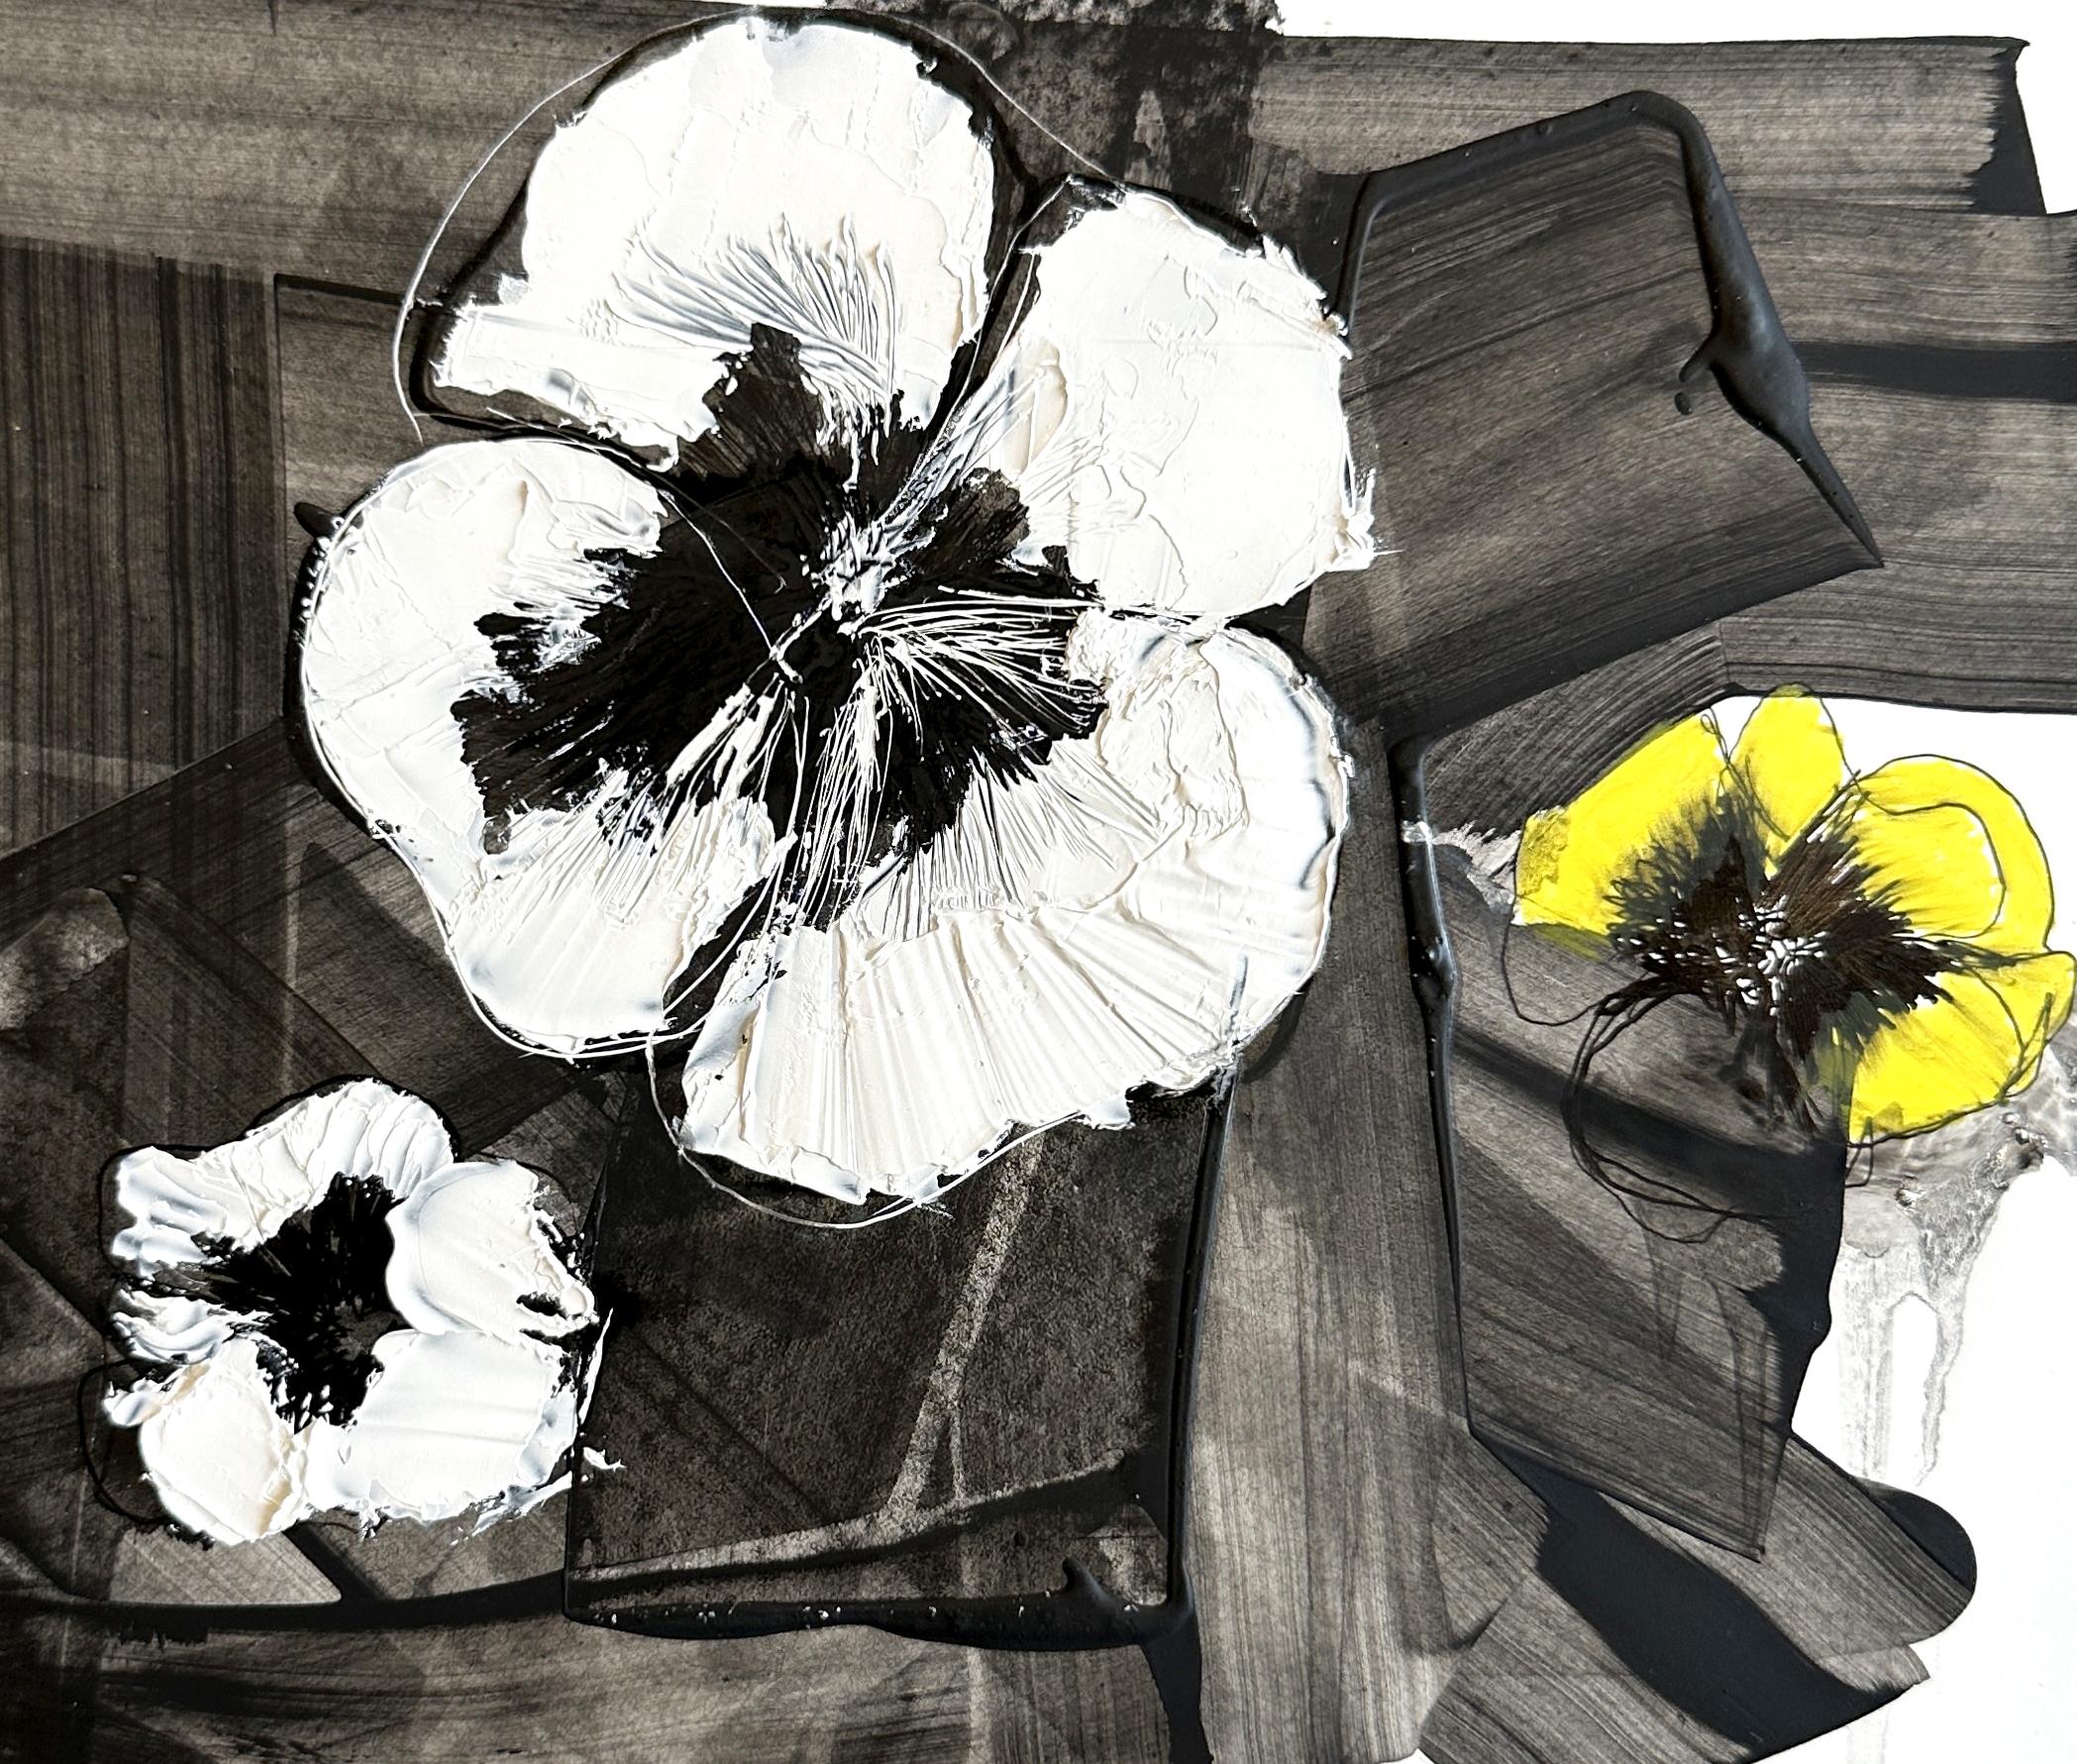  Abstract flowers Pensée, oil painting Pensée, flowers Pensée, yellow Pensée. - Black Still-Life Painting by KOKO HOVAGUIMIAN